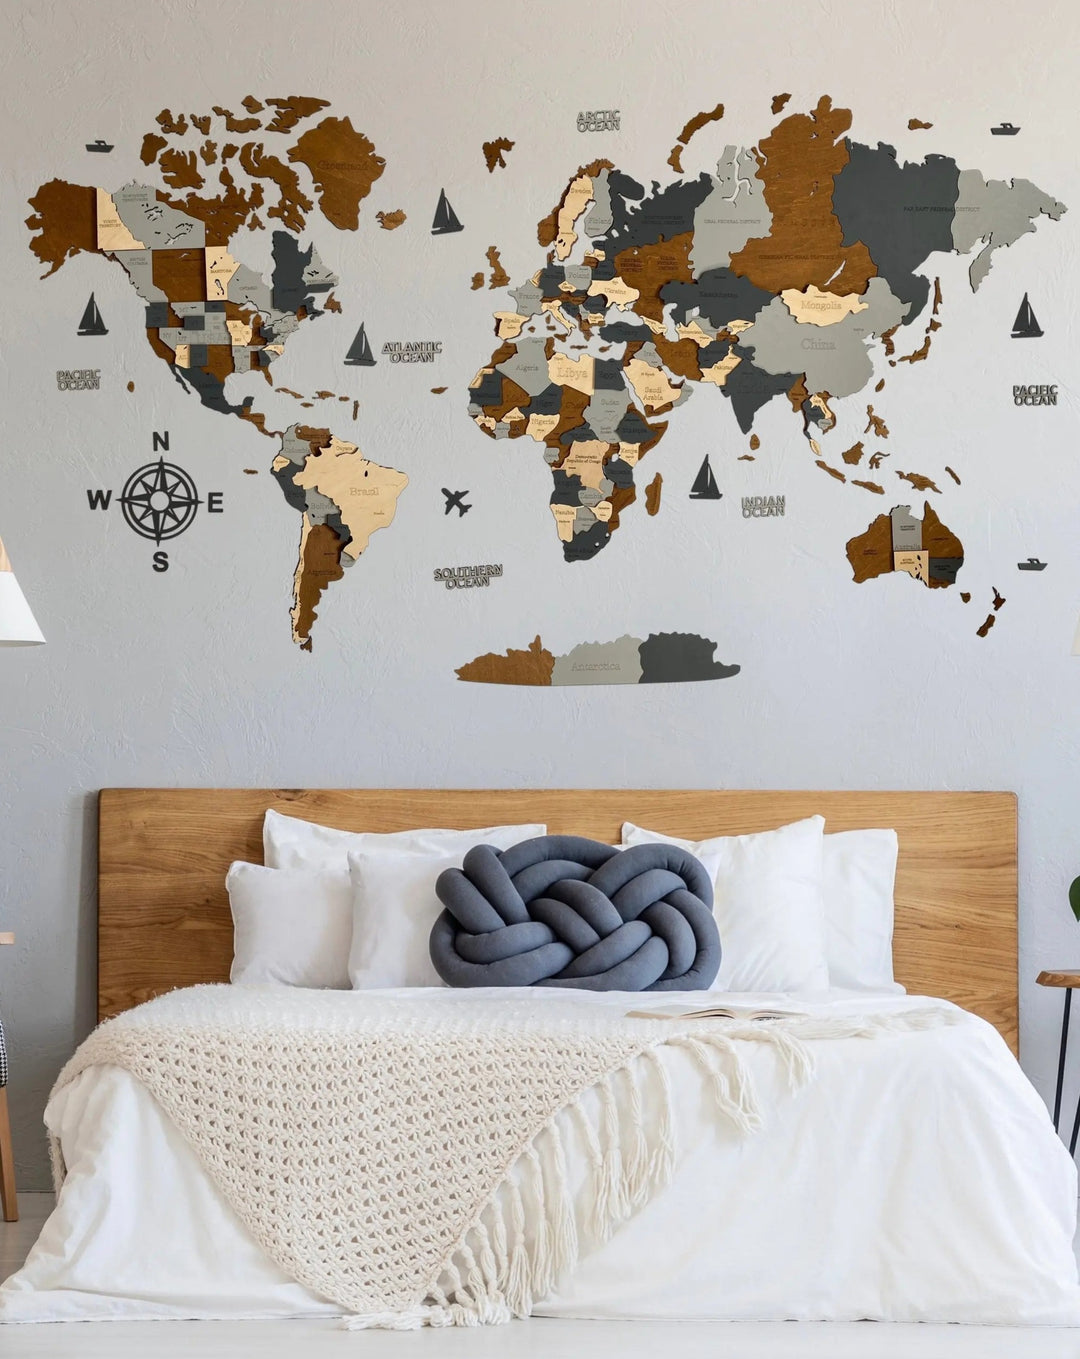 3D WOODEN WORLD WALL MAP "SKY" - WoodLeo